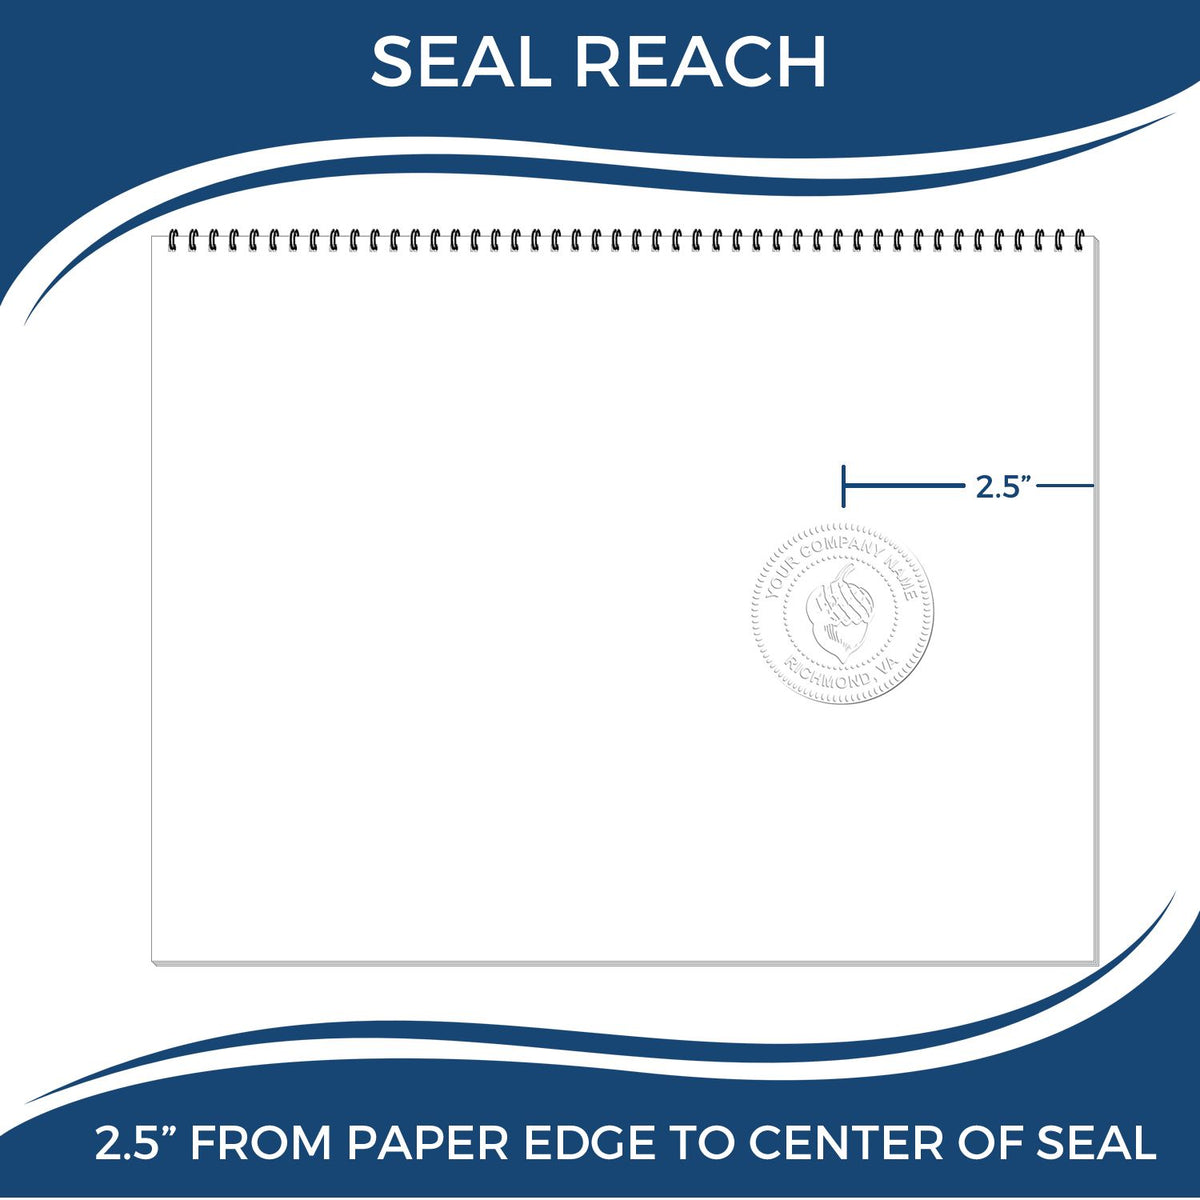 An infographic showing the seal reach which is represented by a ruler and a miniature seal image of the Heavy Duty Cast Iron Kansas Land Surveyor Seal Embosser